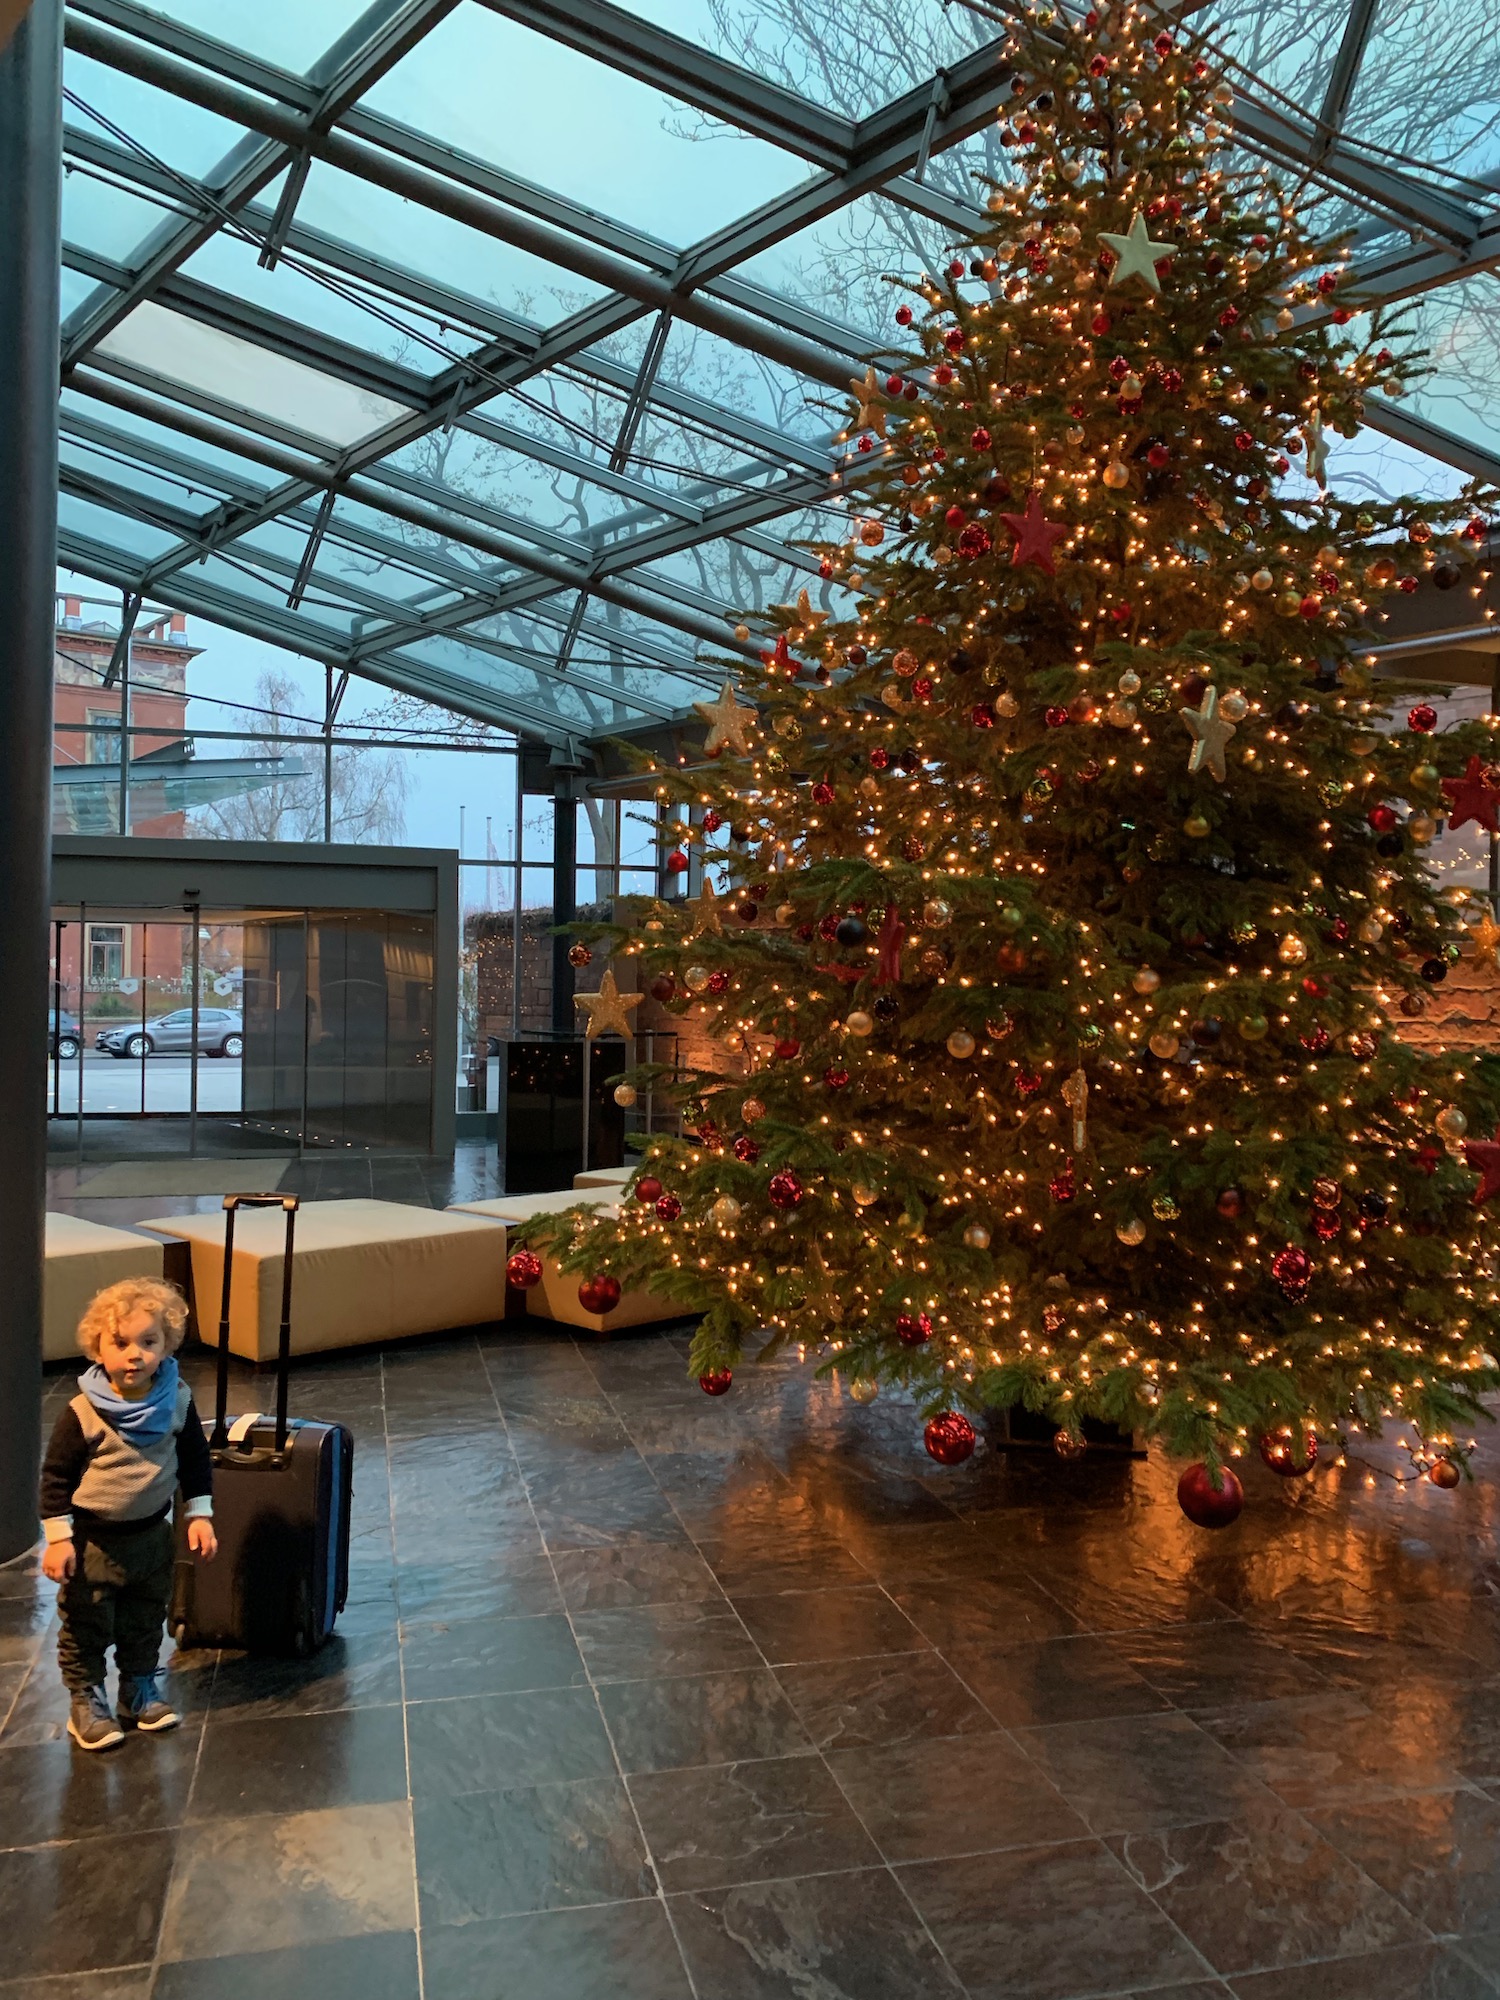 a child standing in front of a christmas tree